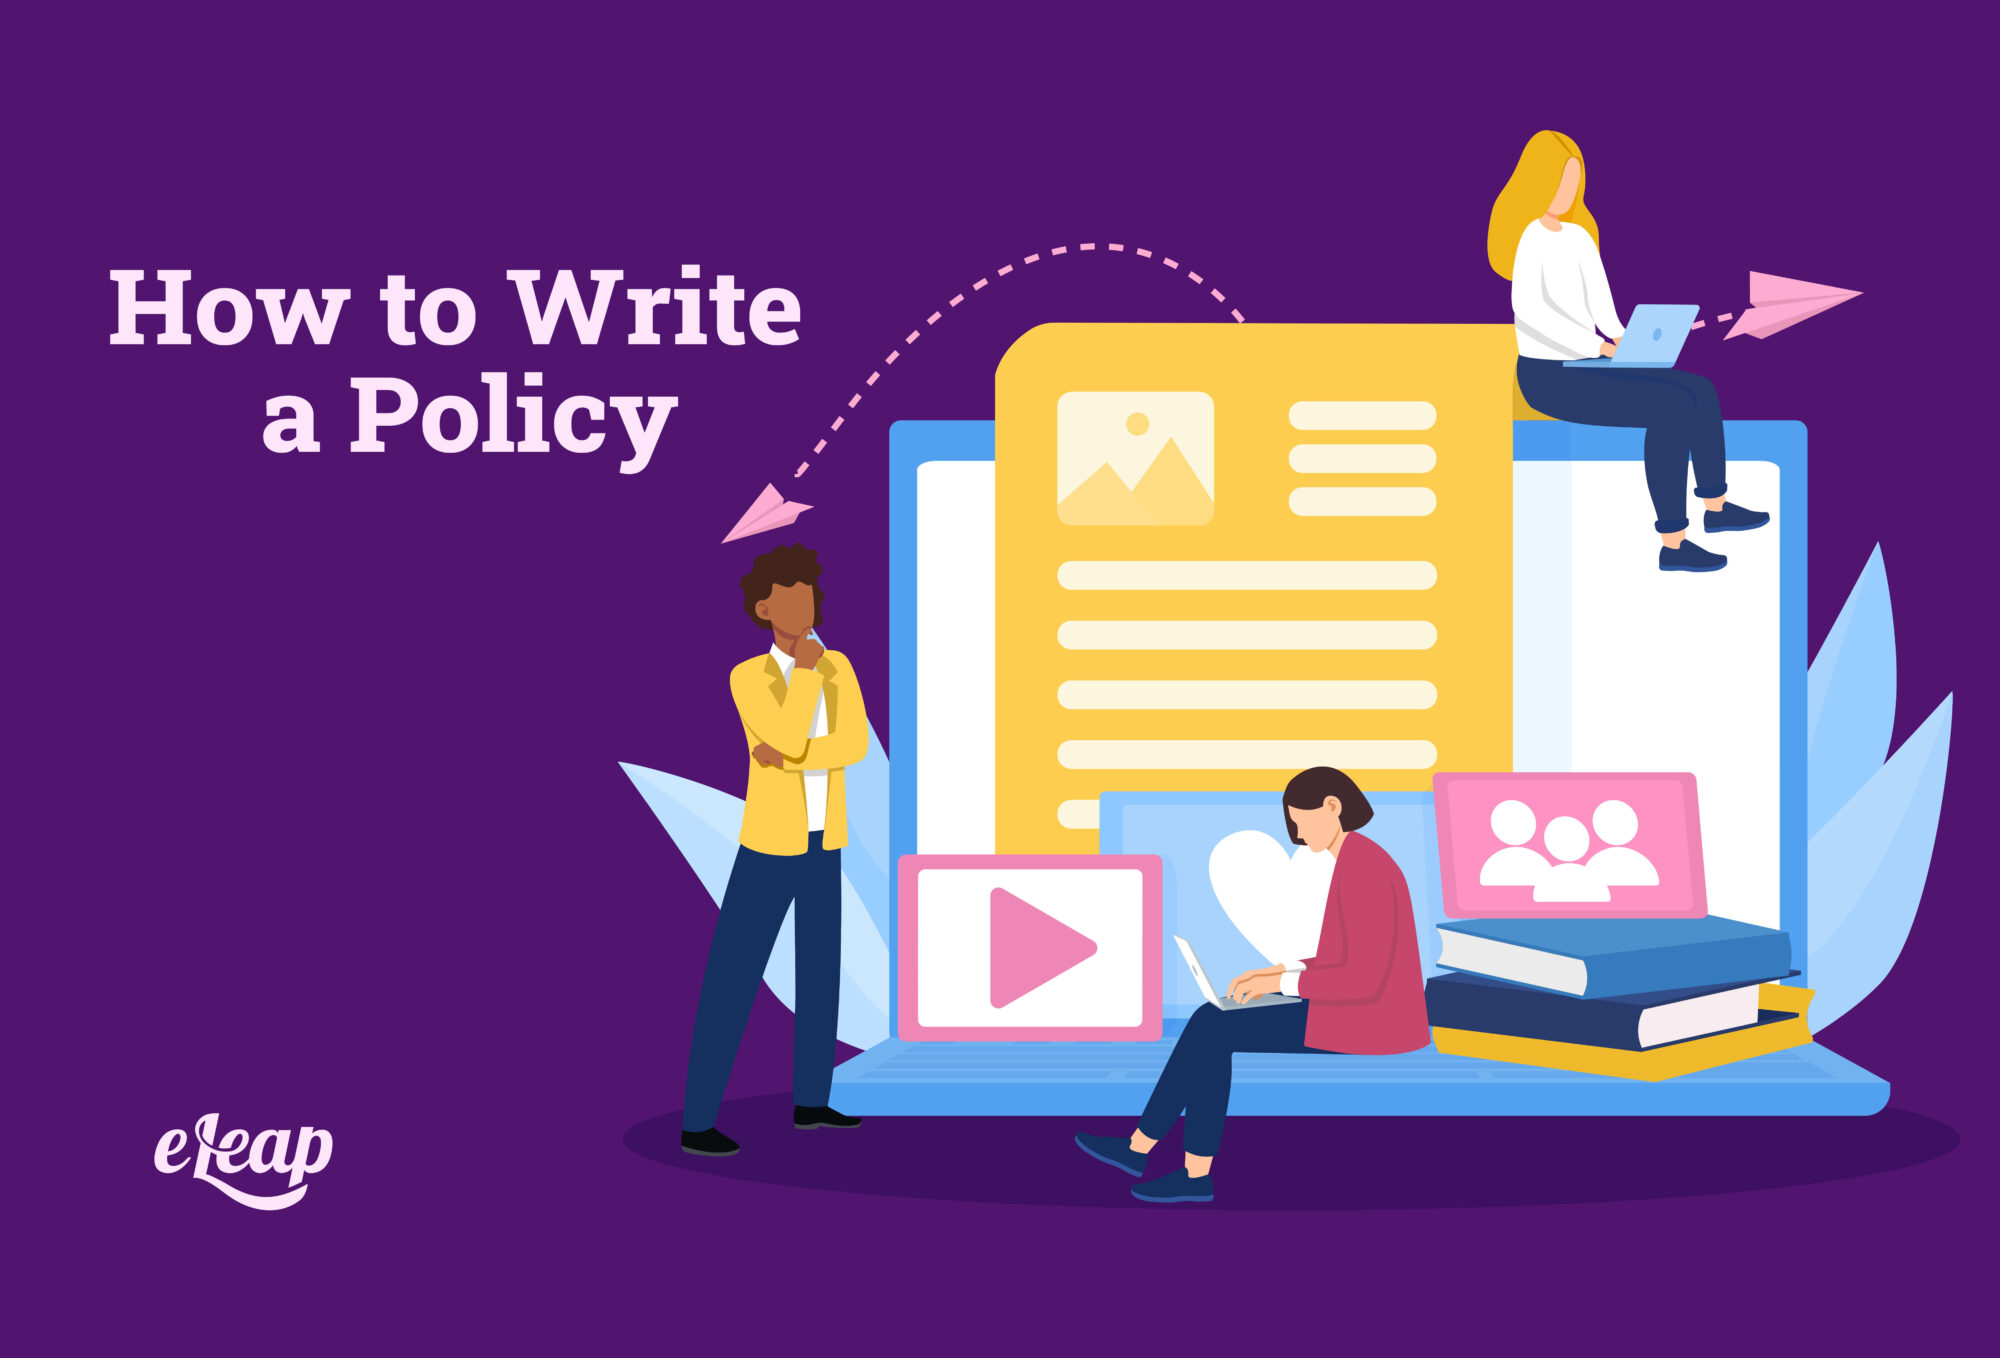 How to Write a Policy